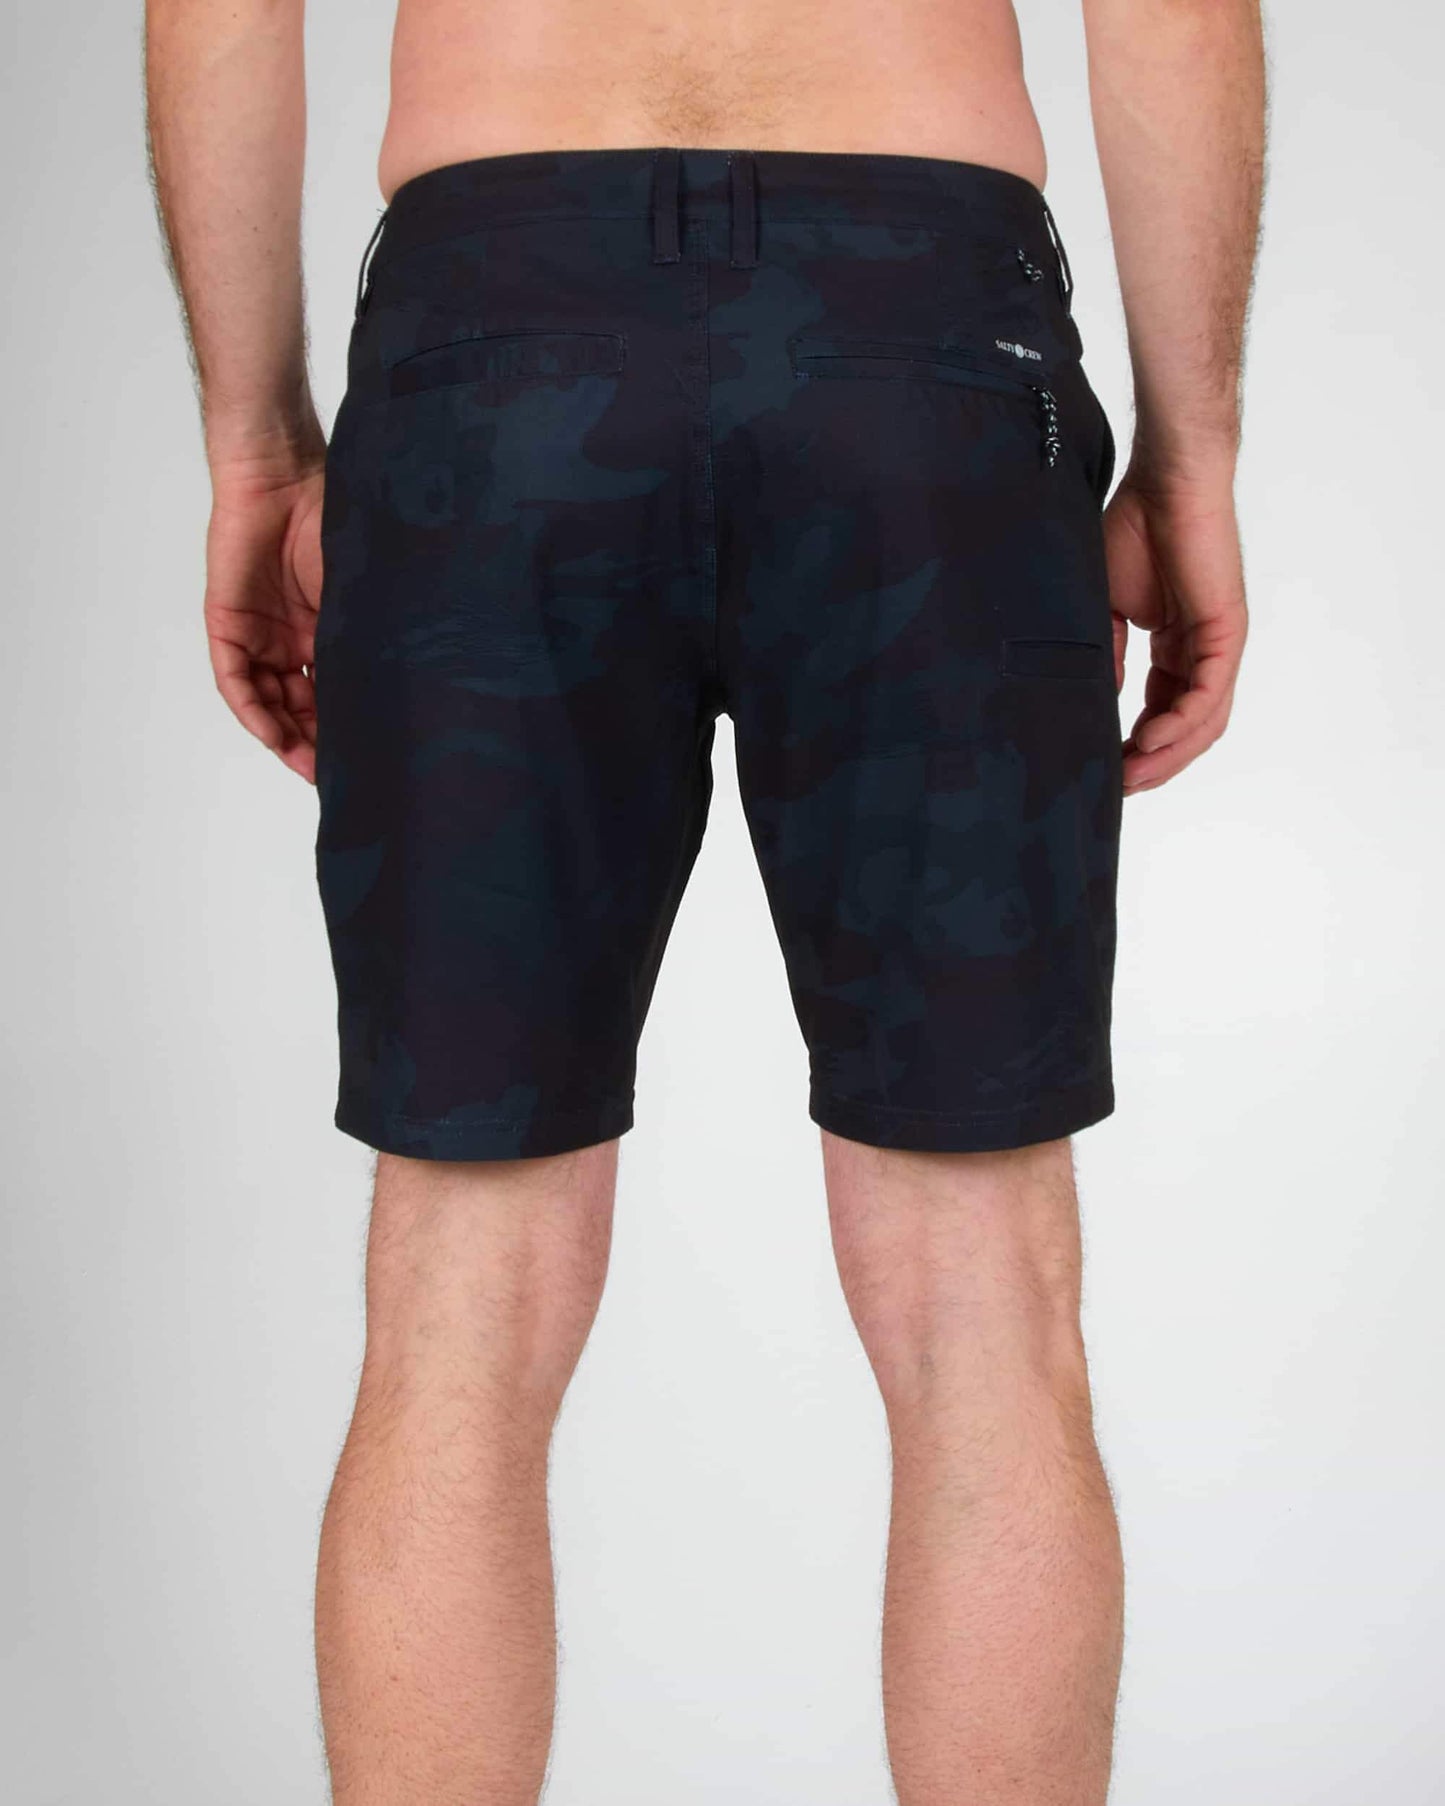 Salty Crew Homens - Drifter 2 Perforated - Black Camo